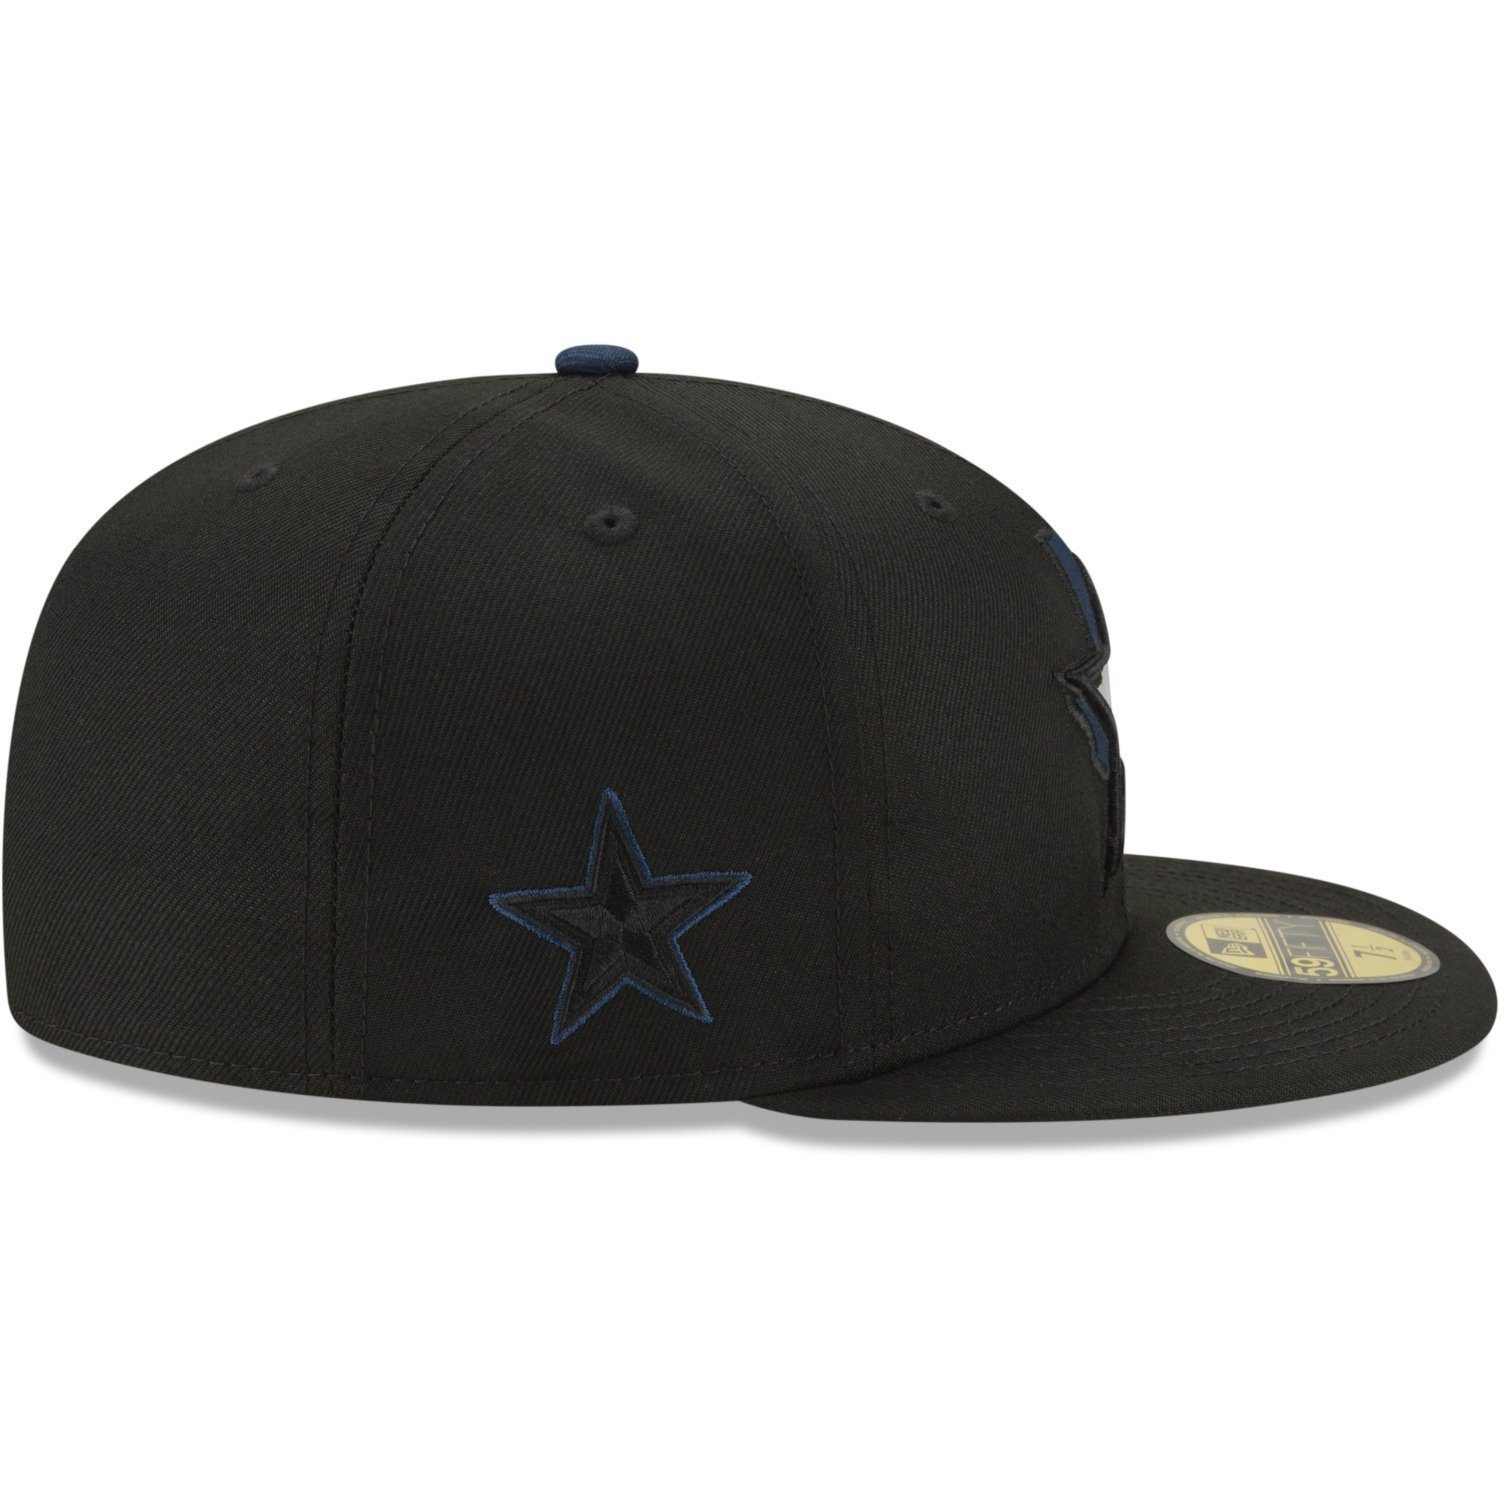 Cowboys Era Dallas 59Fifty Fitted Cap NFL Teams STATE New LOGO